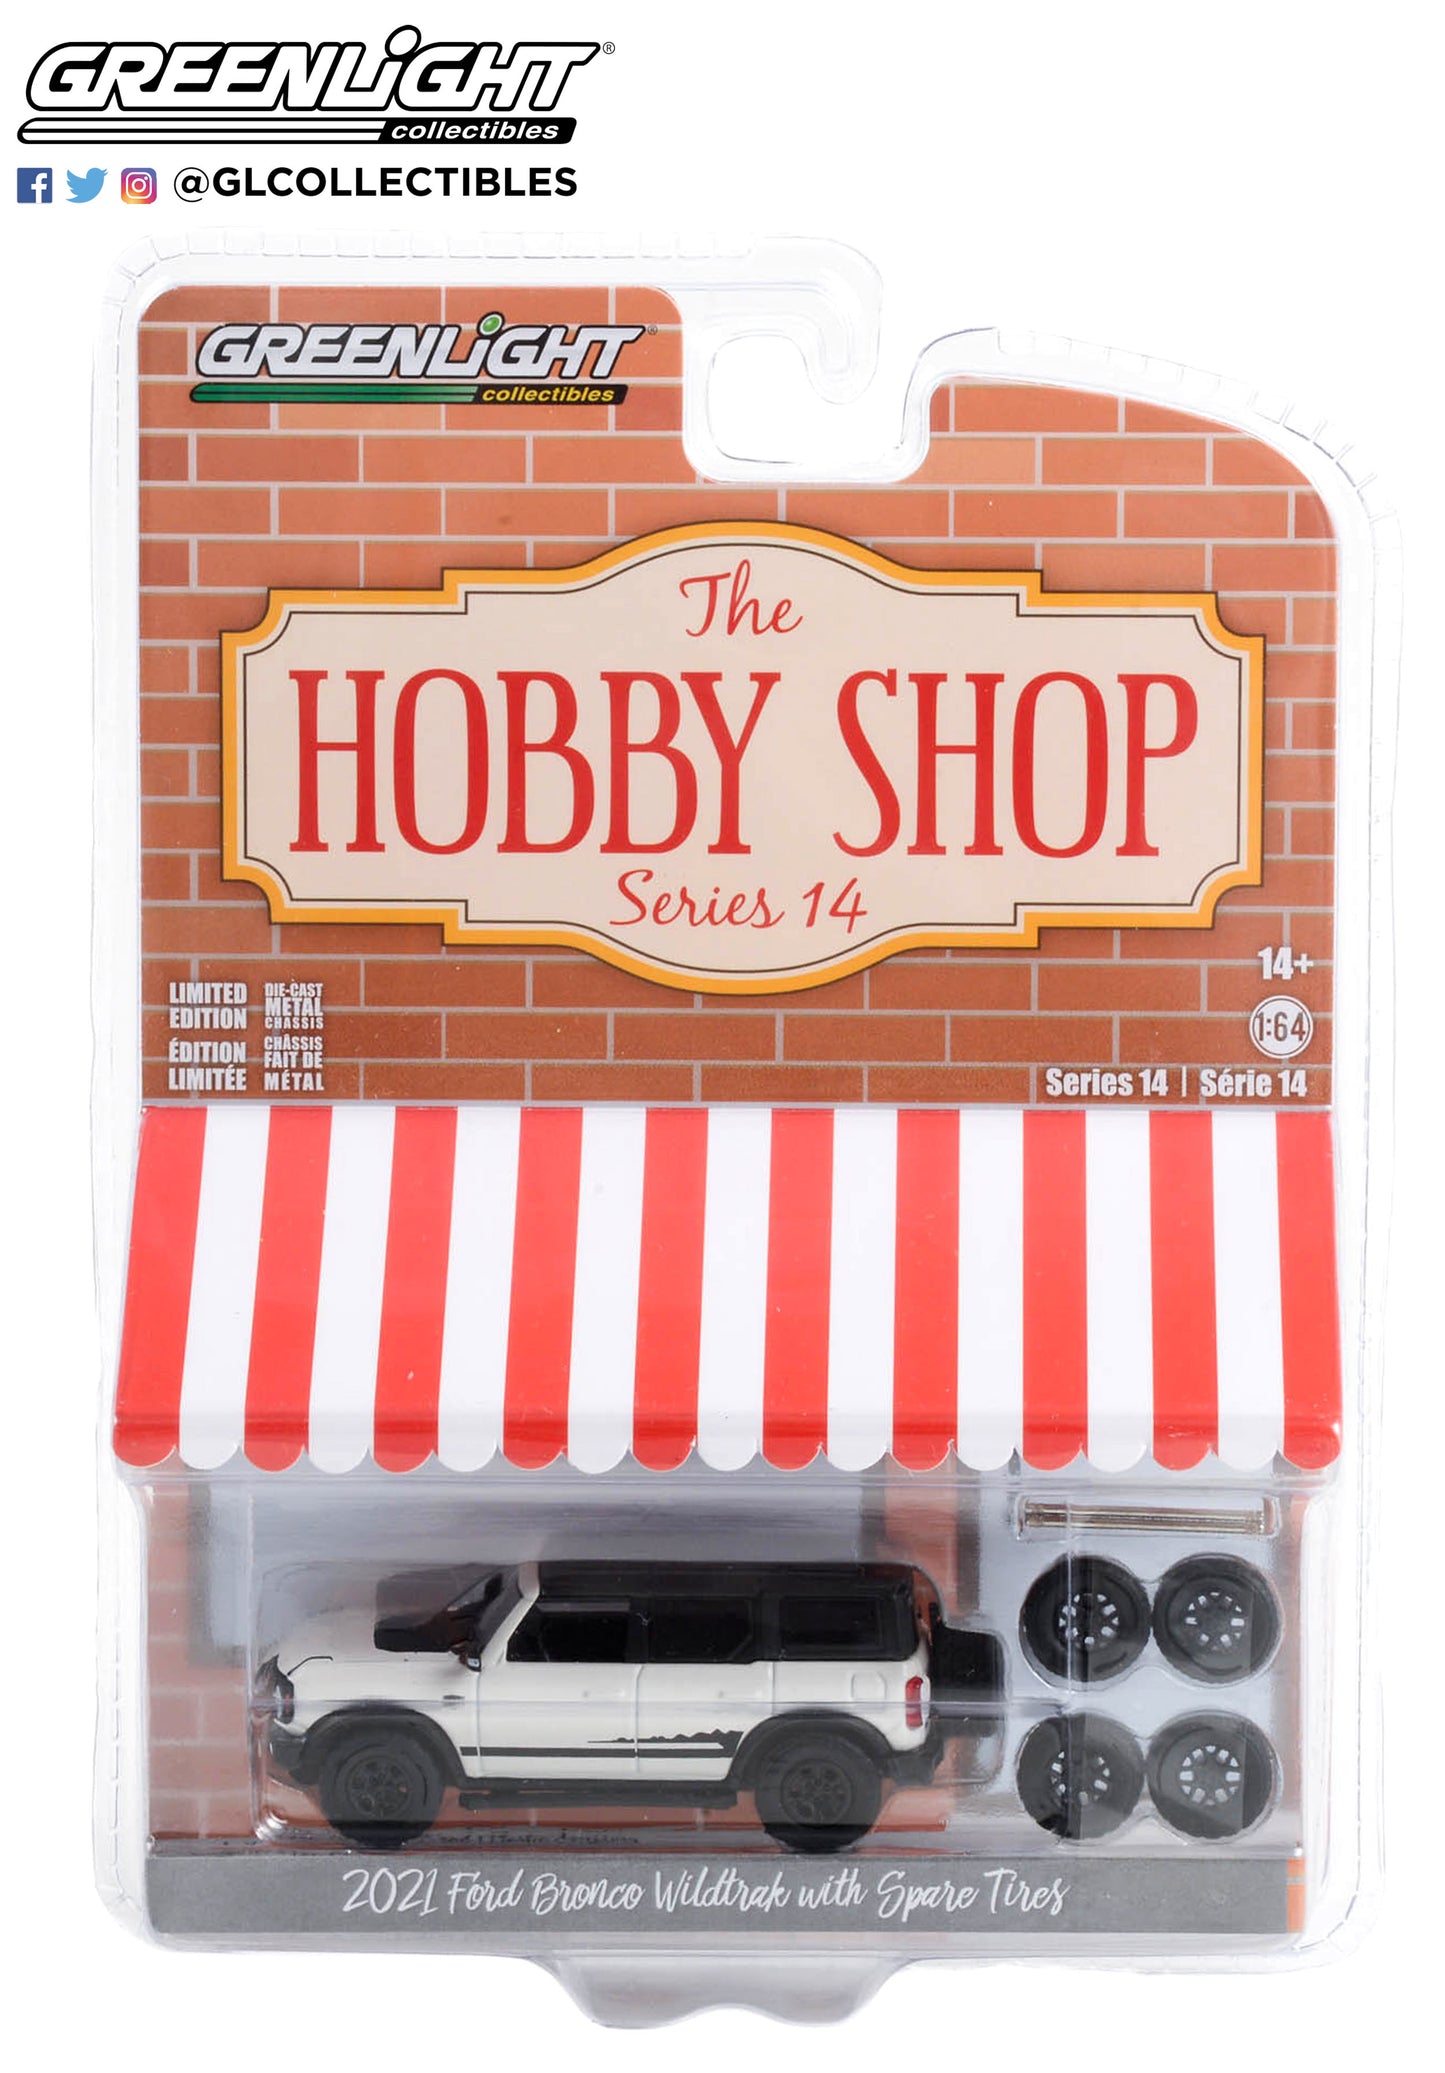 GreenLight 1:64 The Hobby Shop Series 14 - 2021 Ford Bronco Wildtrak with Spare Tires 97140-E